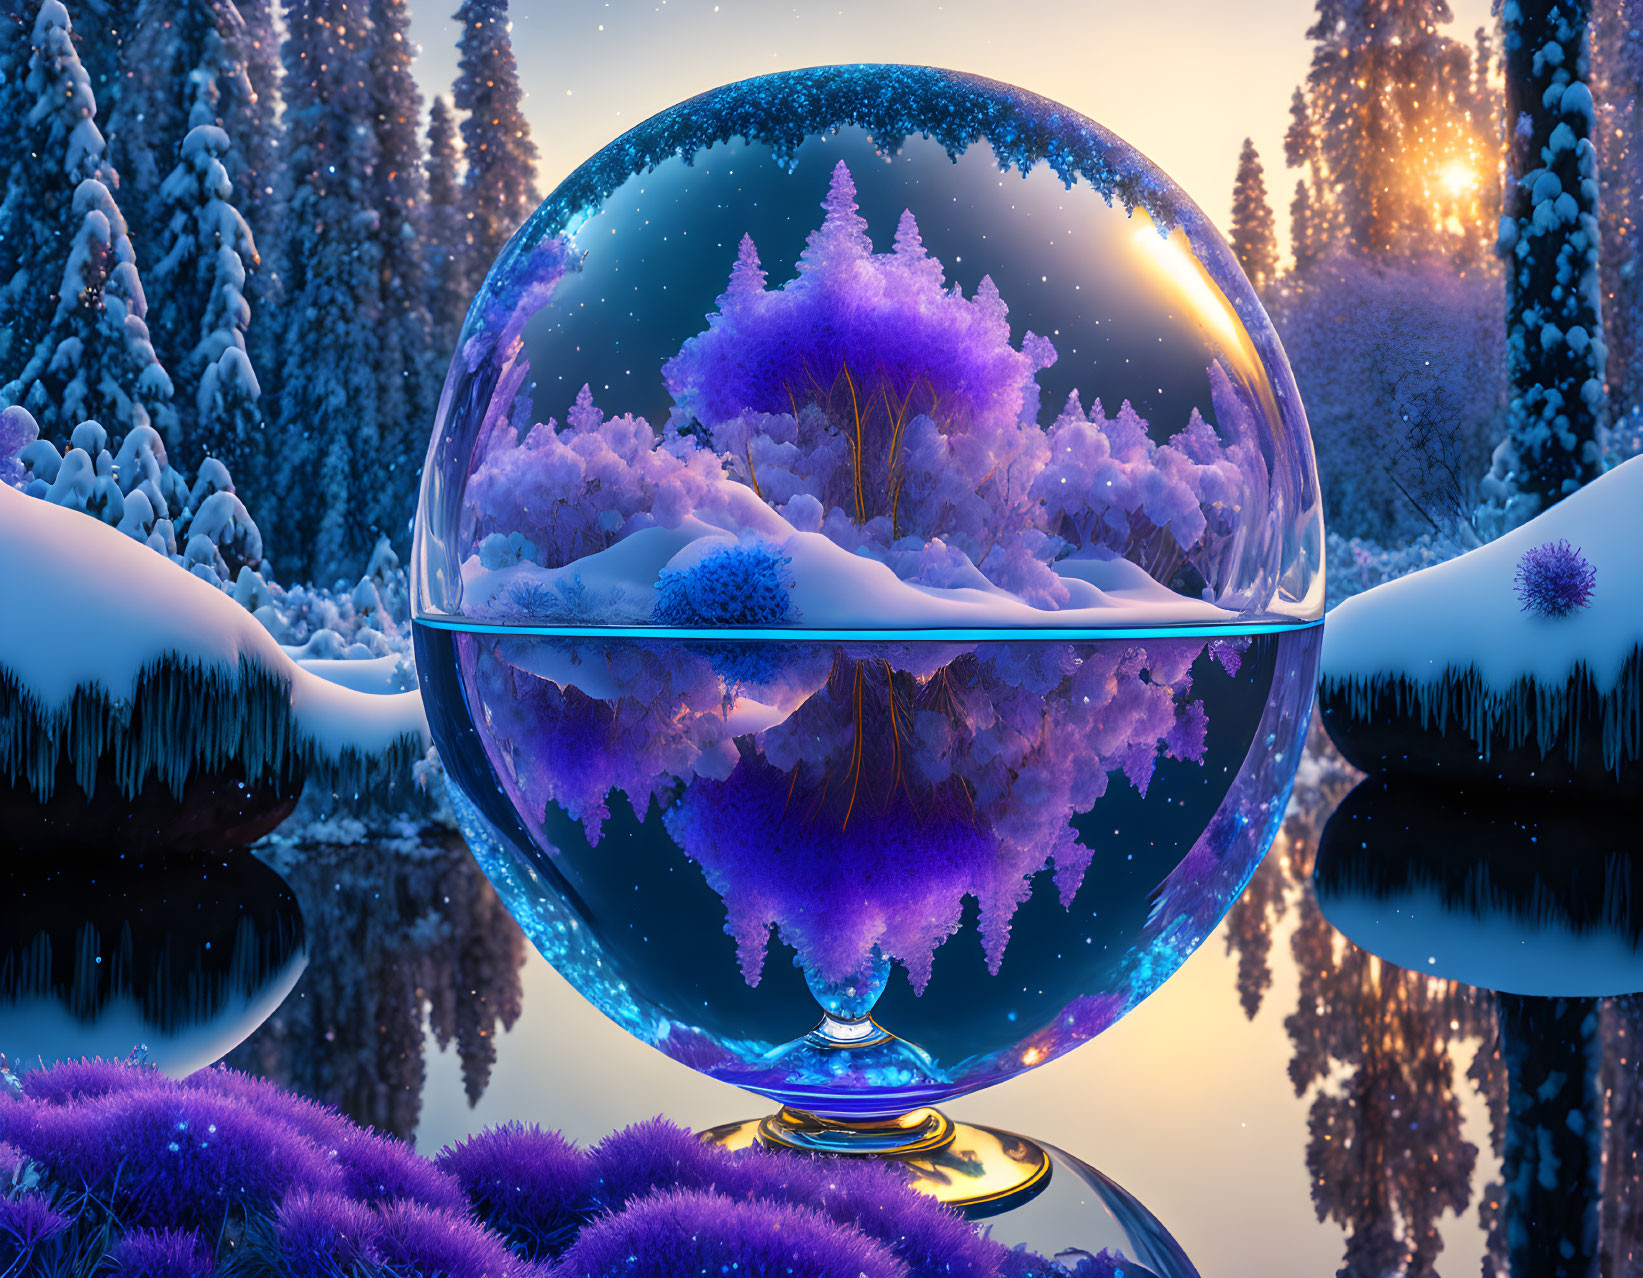 Winter forest scene in crystal ball at sunrise